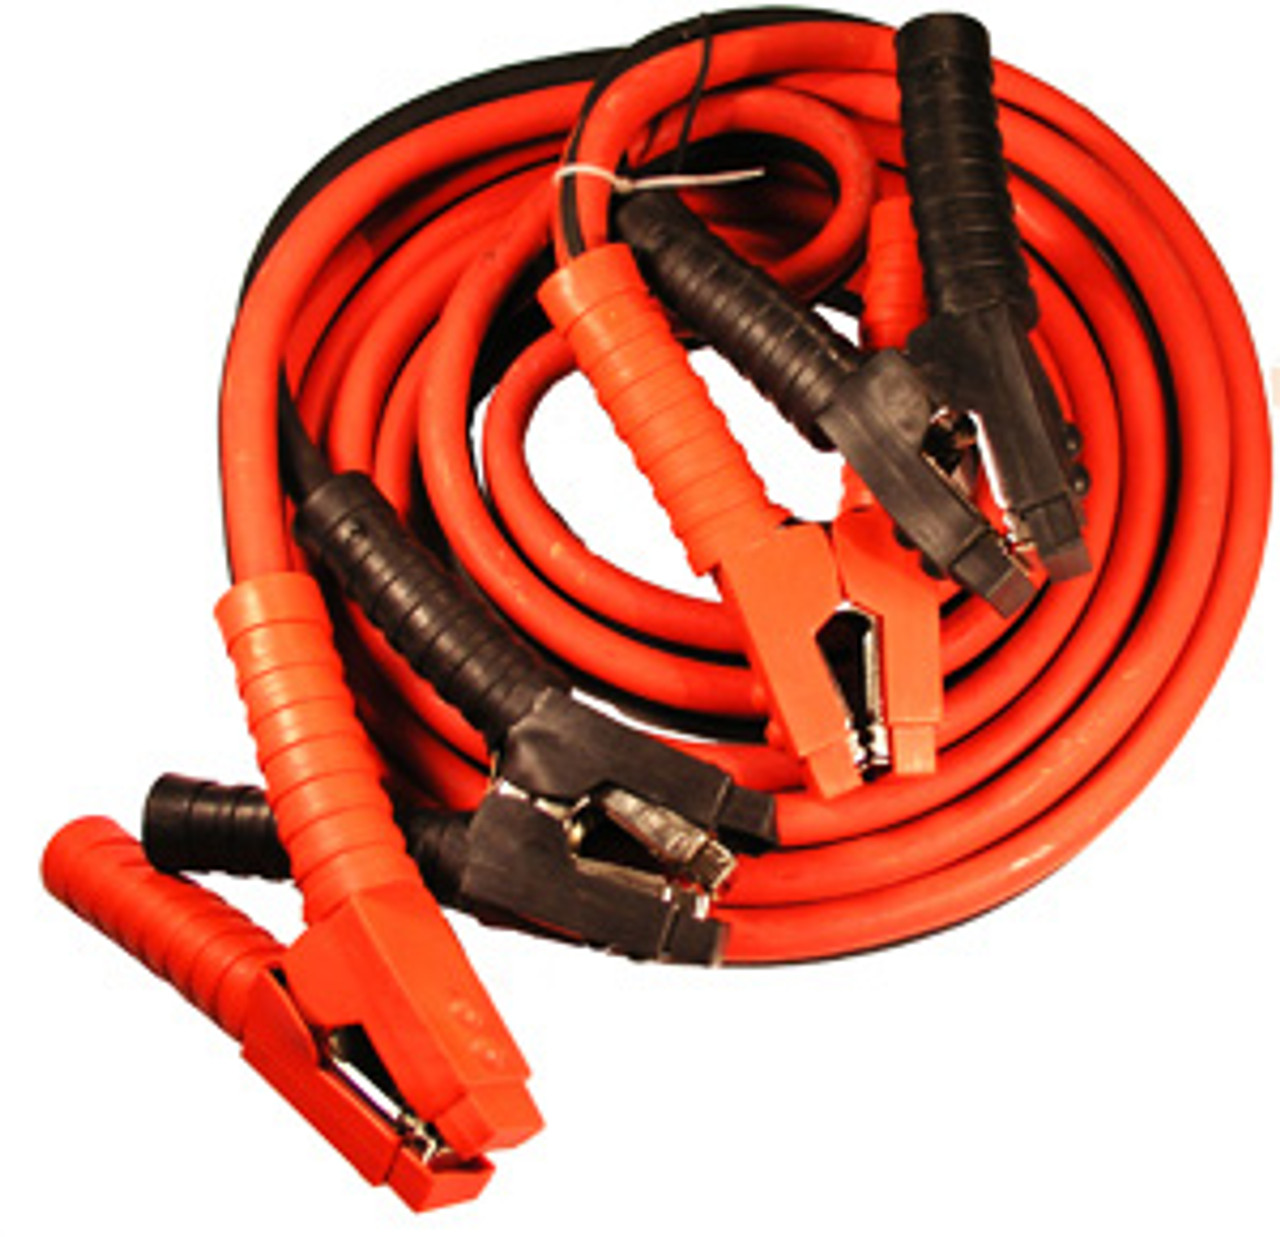 1 AWG 800A @ 30' Red & Black PVC Insulated Booster Cable Set  8180D-E